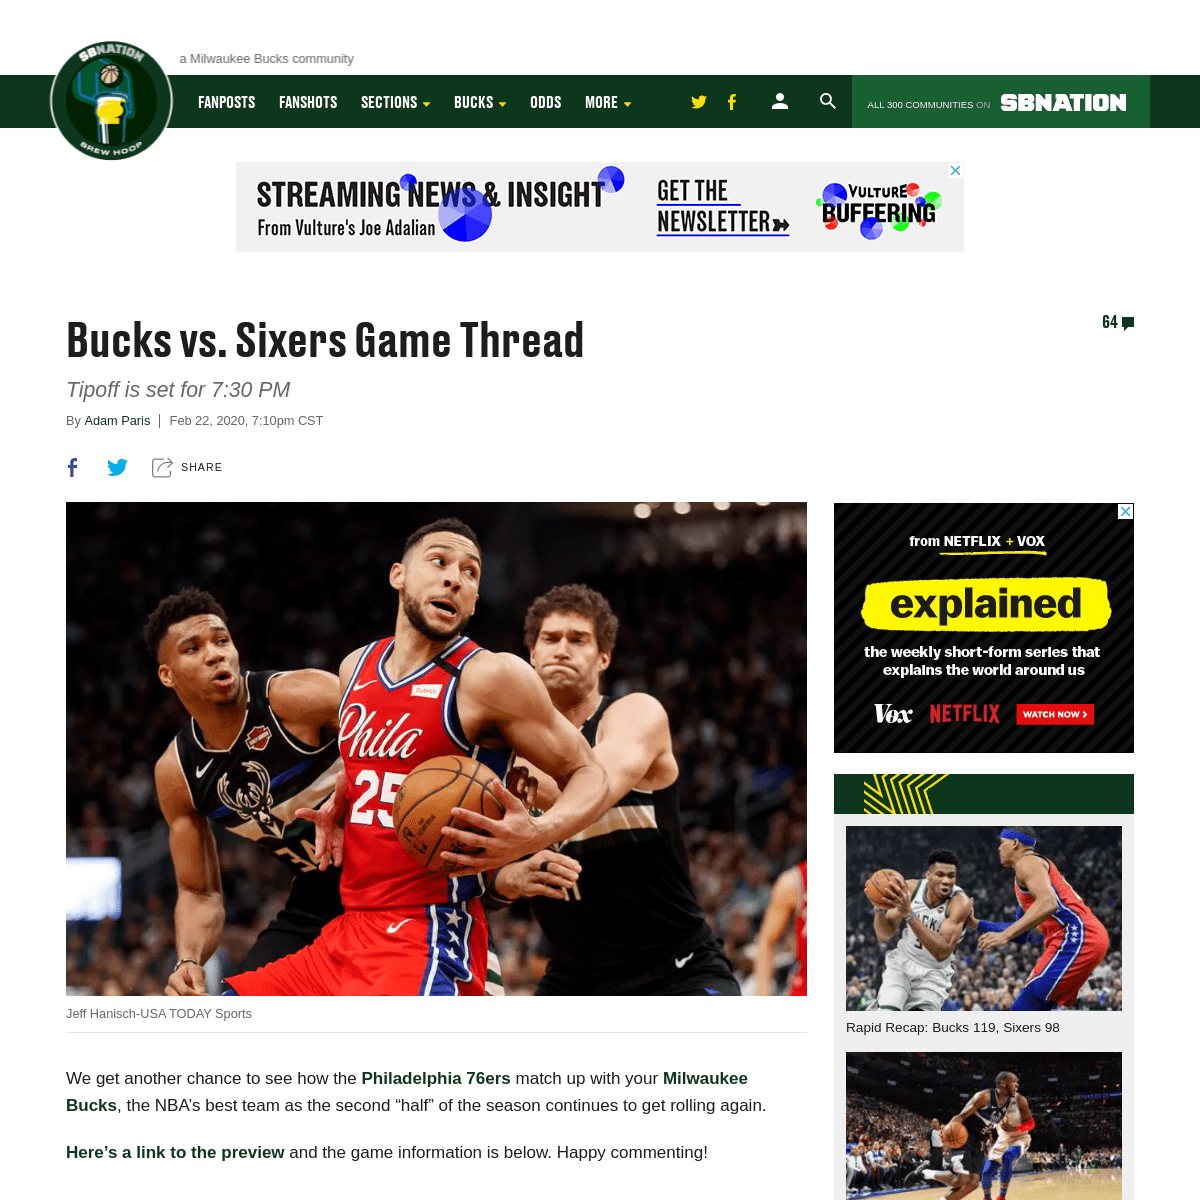 A complete backup of www.brewhoop.com/2020/2/22/21147915/bucks-vs-sixers-game-thread